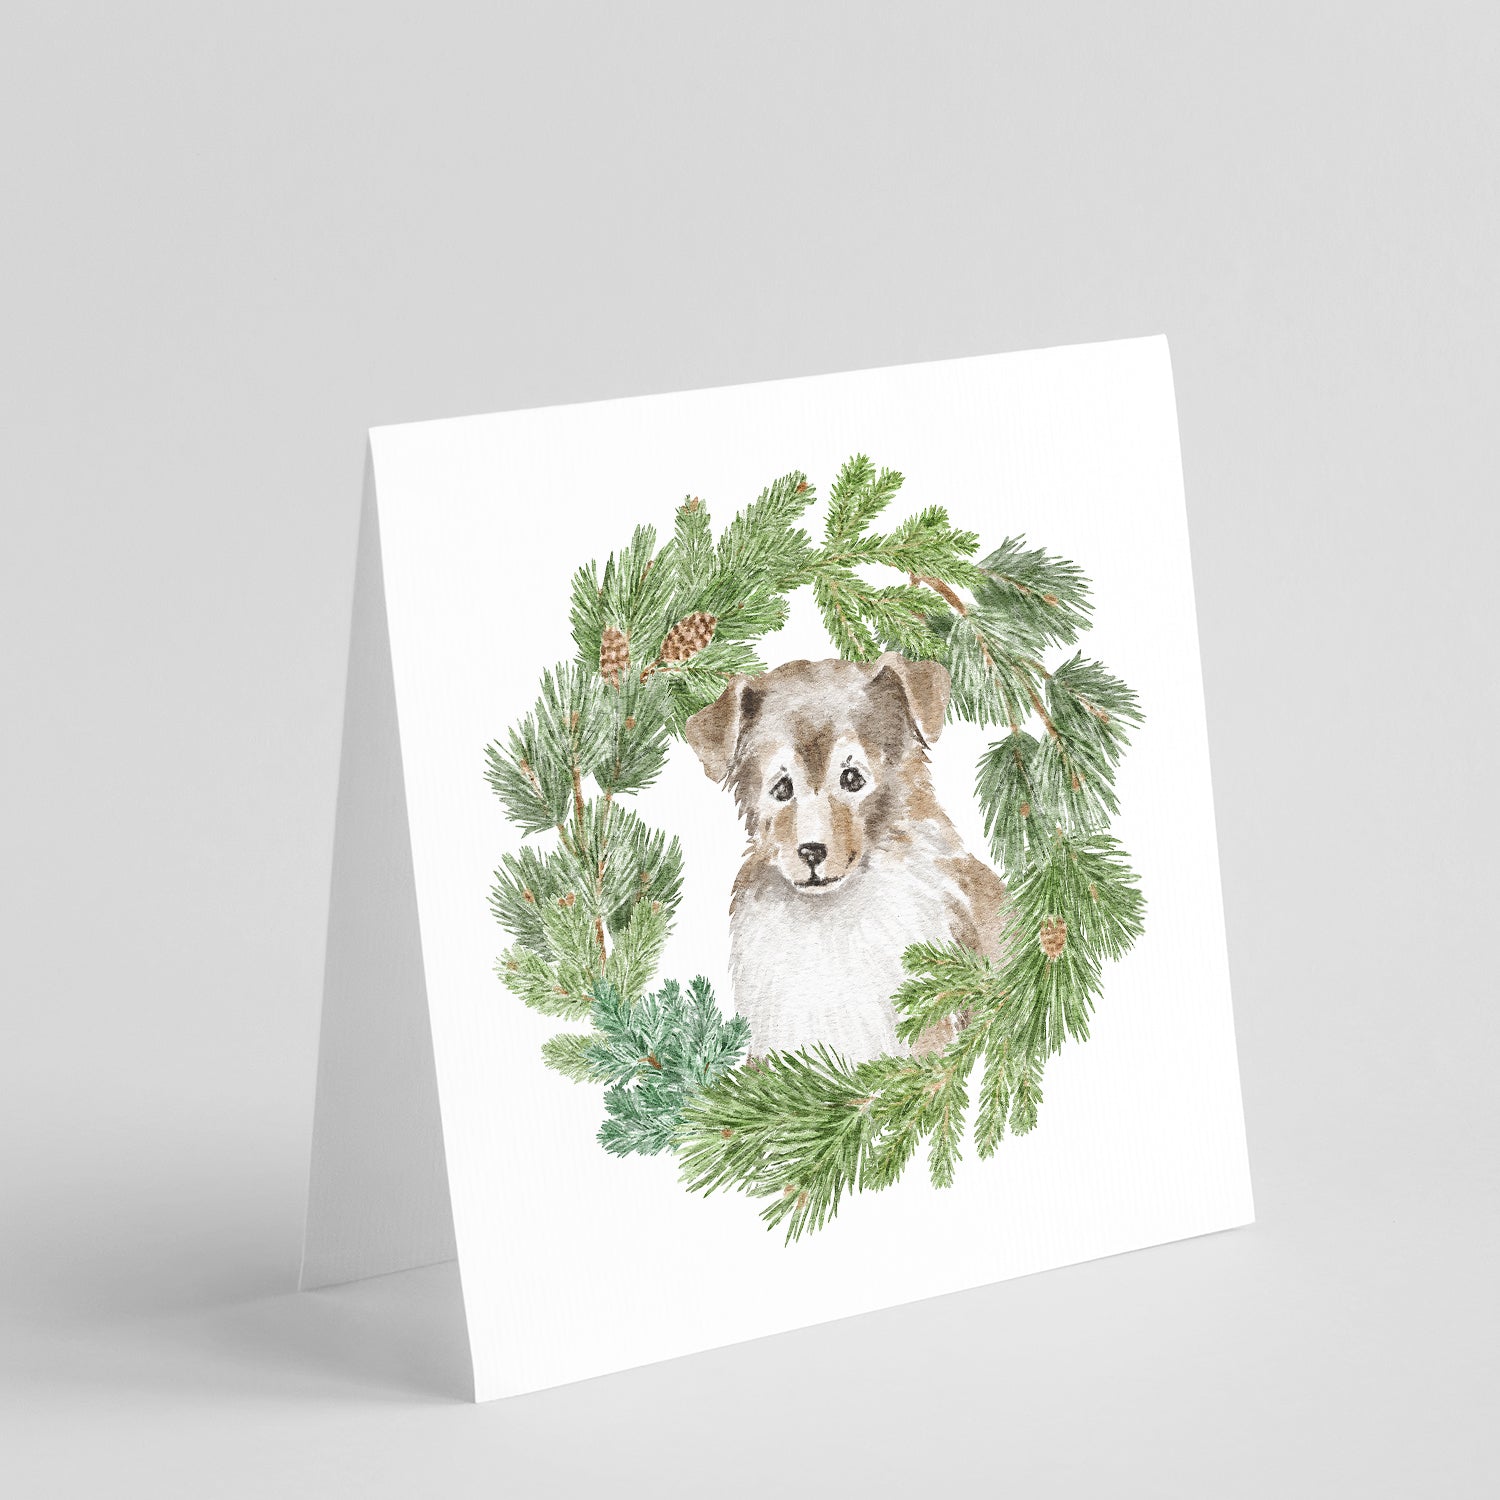 Buy this Sheltie/Shetland Sheepdog Puppy Sable Smile with Christmas Wreath Square Greeting Cards and Envelopes Pack of 8